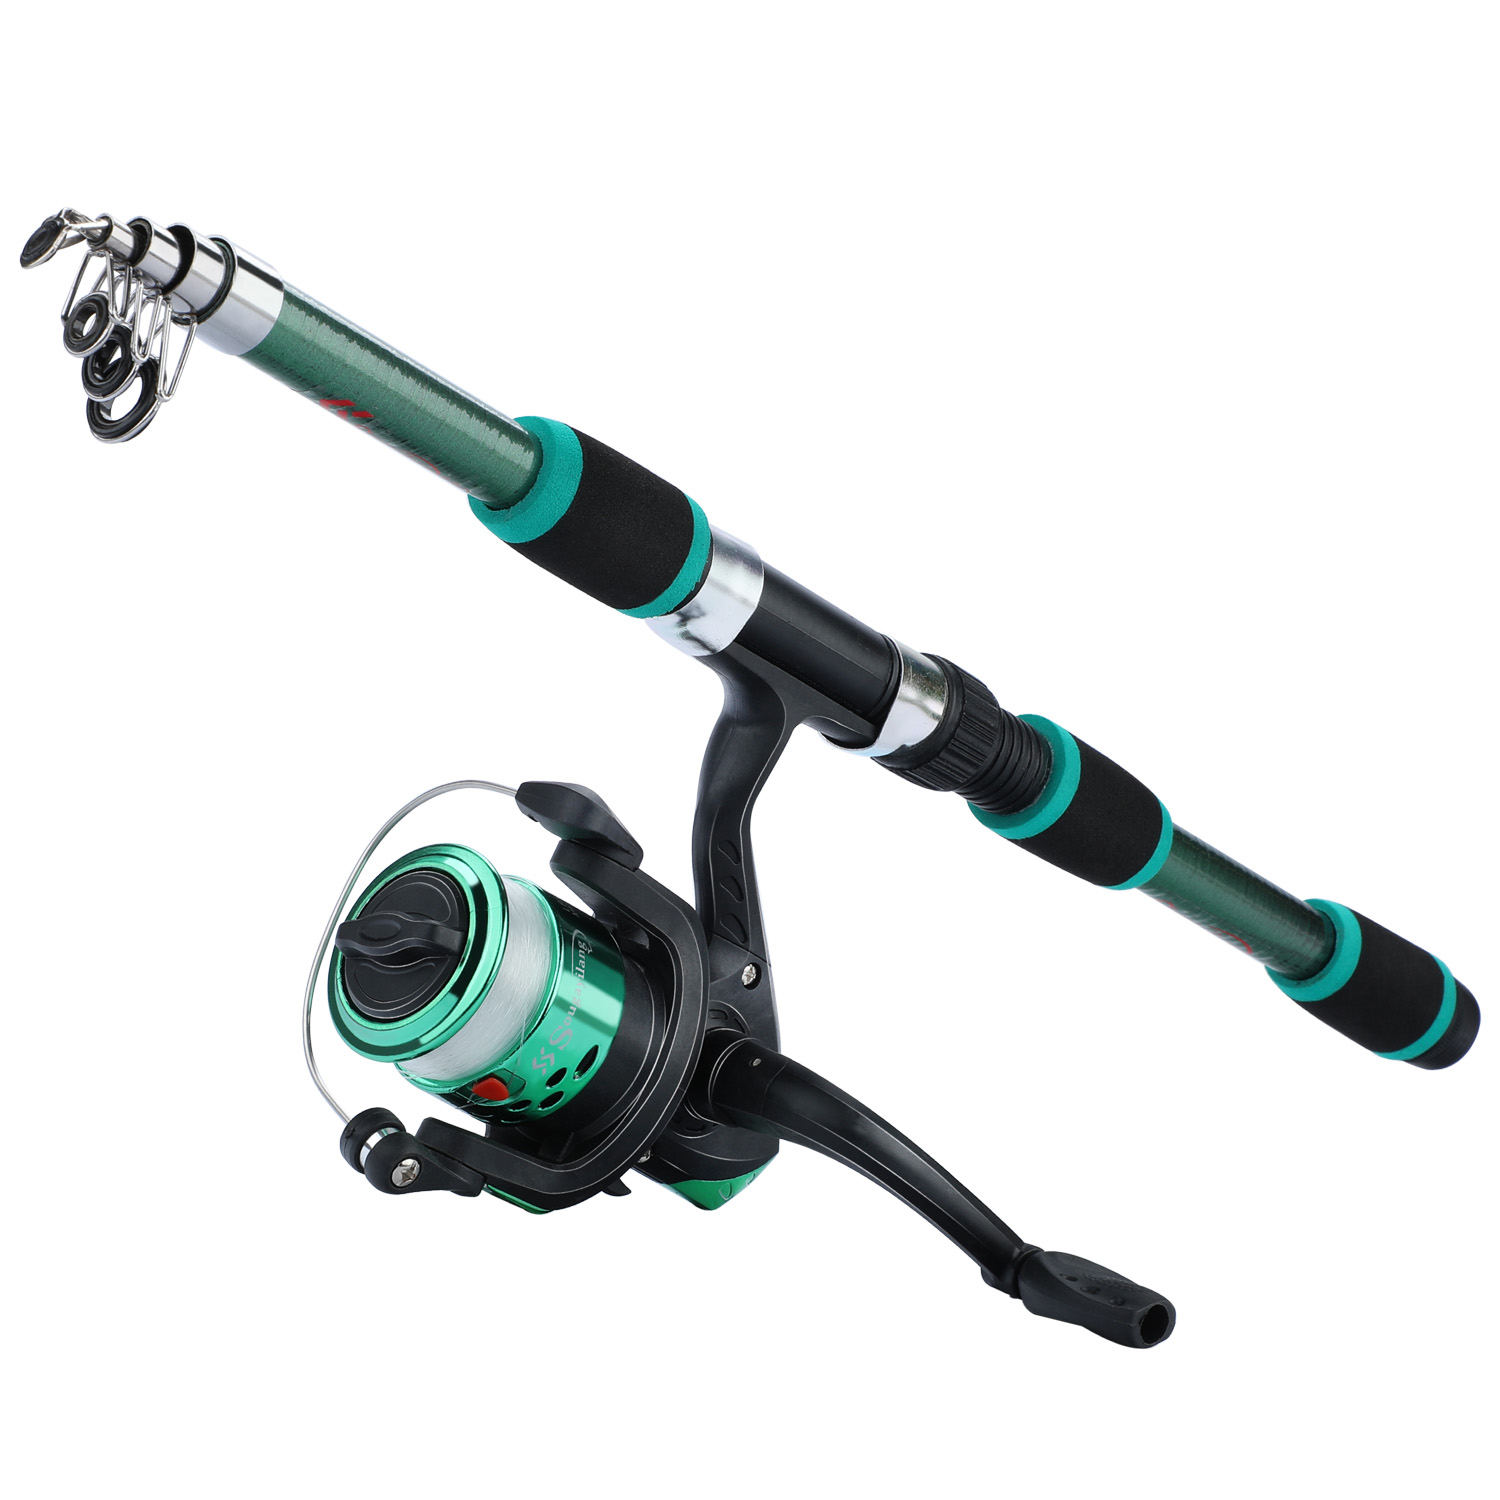 1.8M Fishing Rod Reel Sets 5.2:1 Gear Ratio Spinning Reels Glass Fiber Rods  with Fishing Accessories Fishing Kit